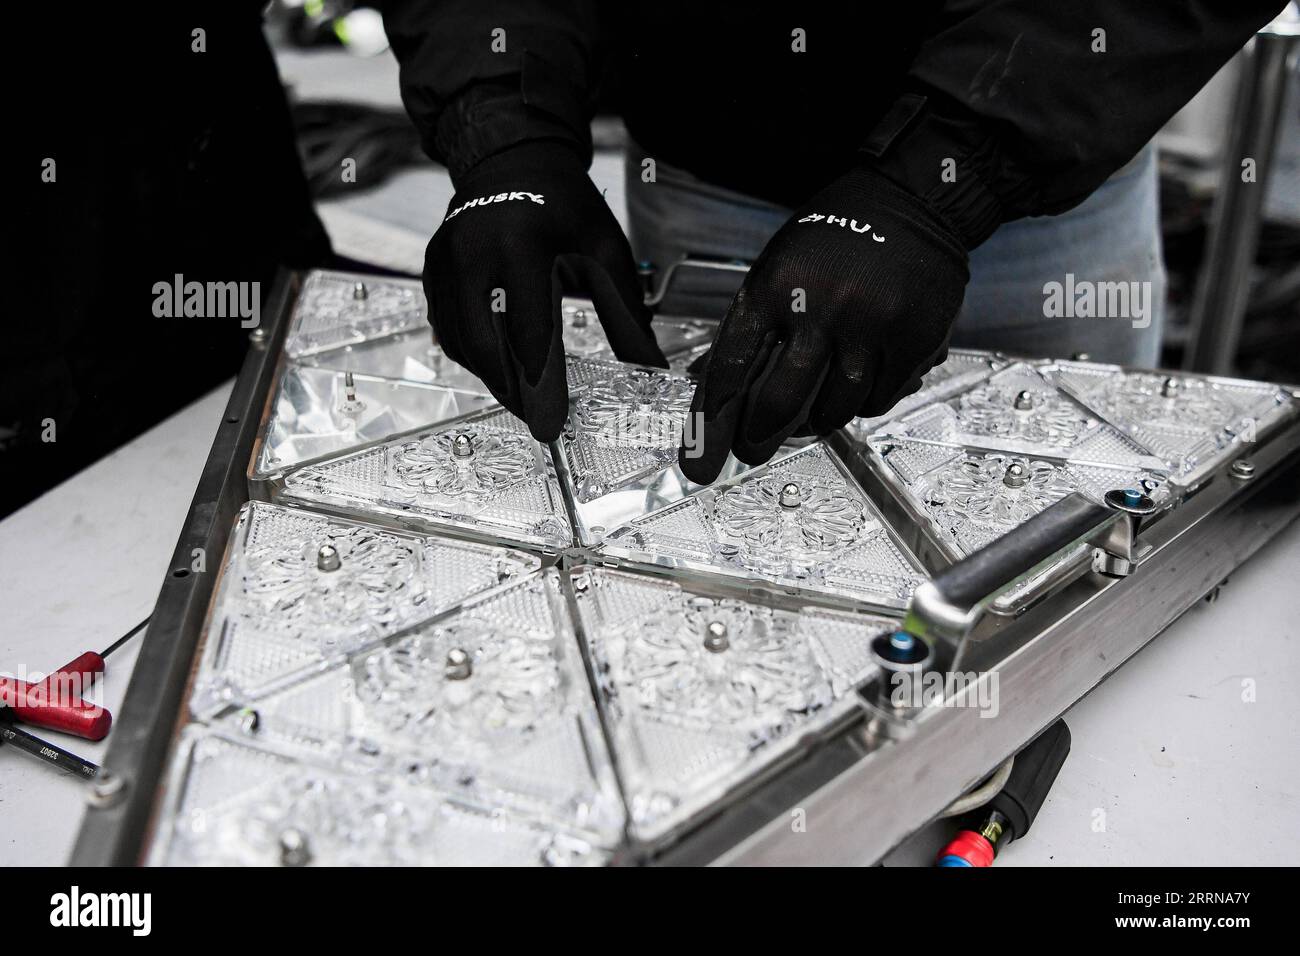 221227 -- NEW YORK, Dec. 27, 2022 -- A piece of crystal is put into a larger pattern during the Crystal Times Square New Year s Ball assembly on the roof of One Times Square, New York, the United States, on Dec. 27, 2022. As part of the yearly tradition, replacement of some of the 2,688 Waterford Crystal triangles on the Times Square New Year s Eve Ball started on Tuesday. The ball, 12 feet in diameter and 11,875 pounds in weight, will begin its descent at 11:59 p.m., Dec. 31, starting the countdown of the final seconds of the year and celebrating the beginning of a new year, at the climax of Stock Photo